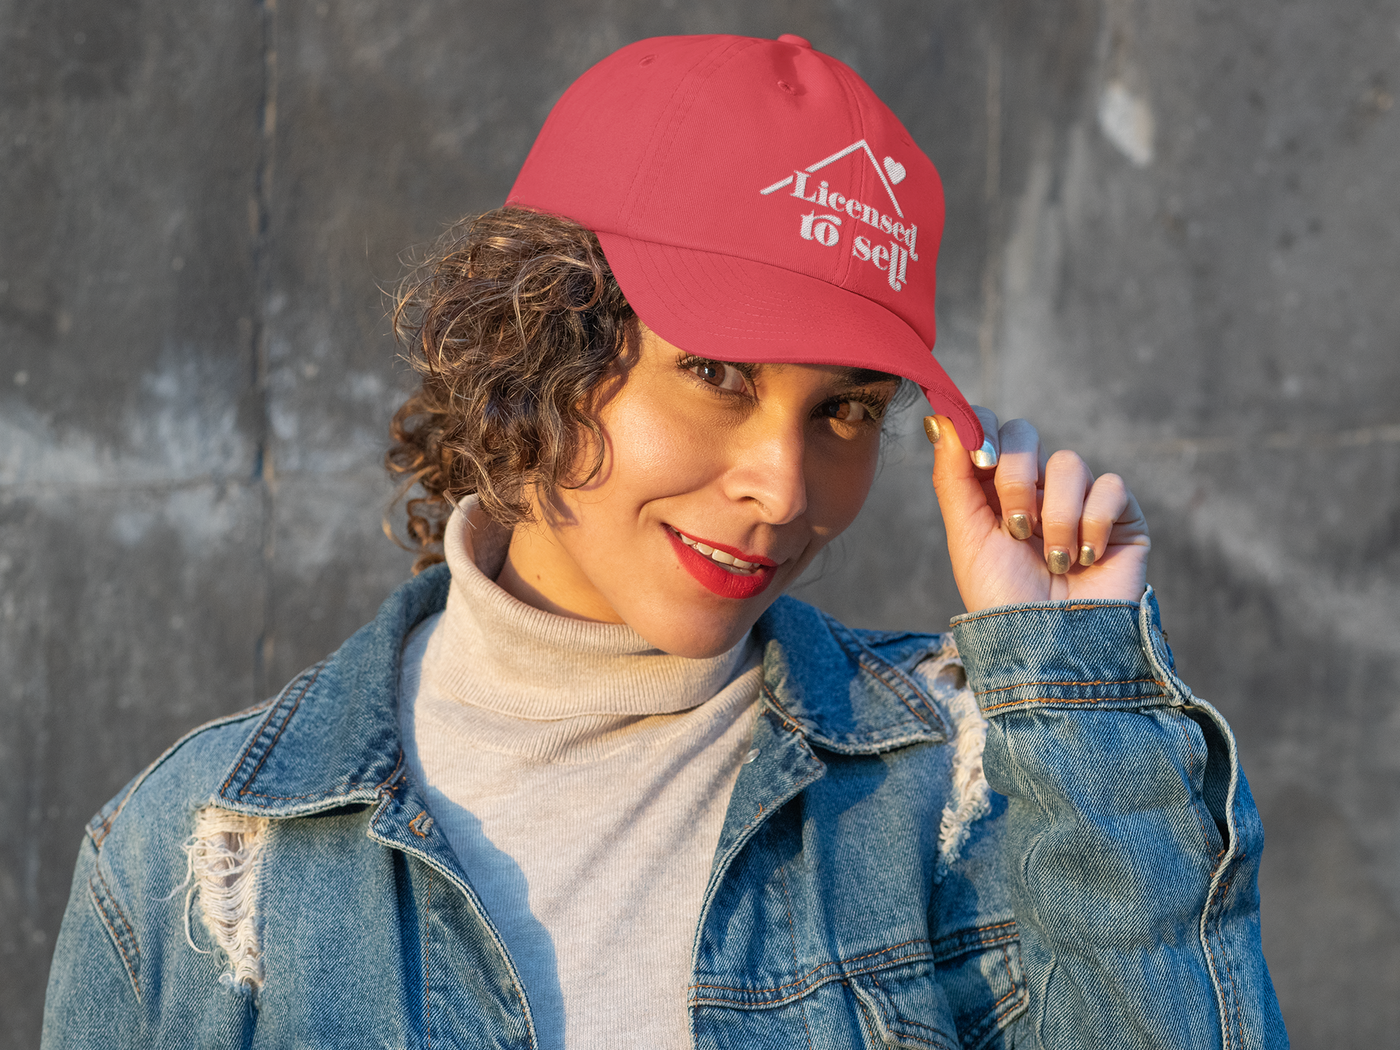 Hat - Licensed to Sell